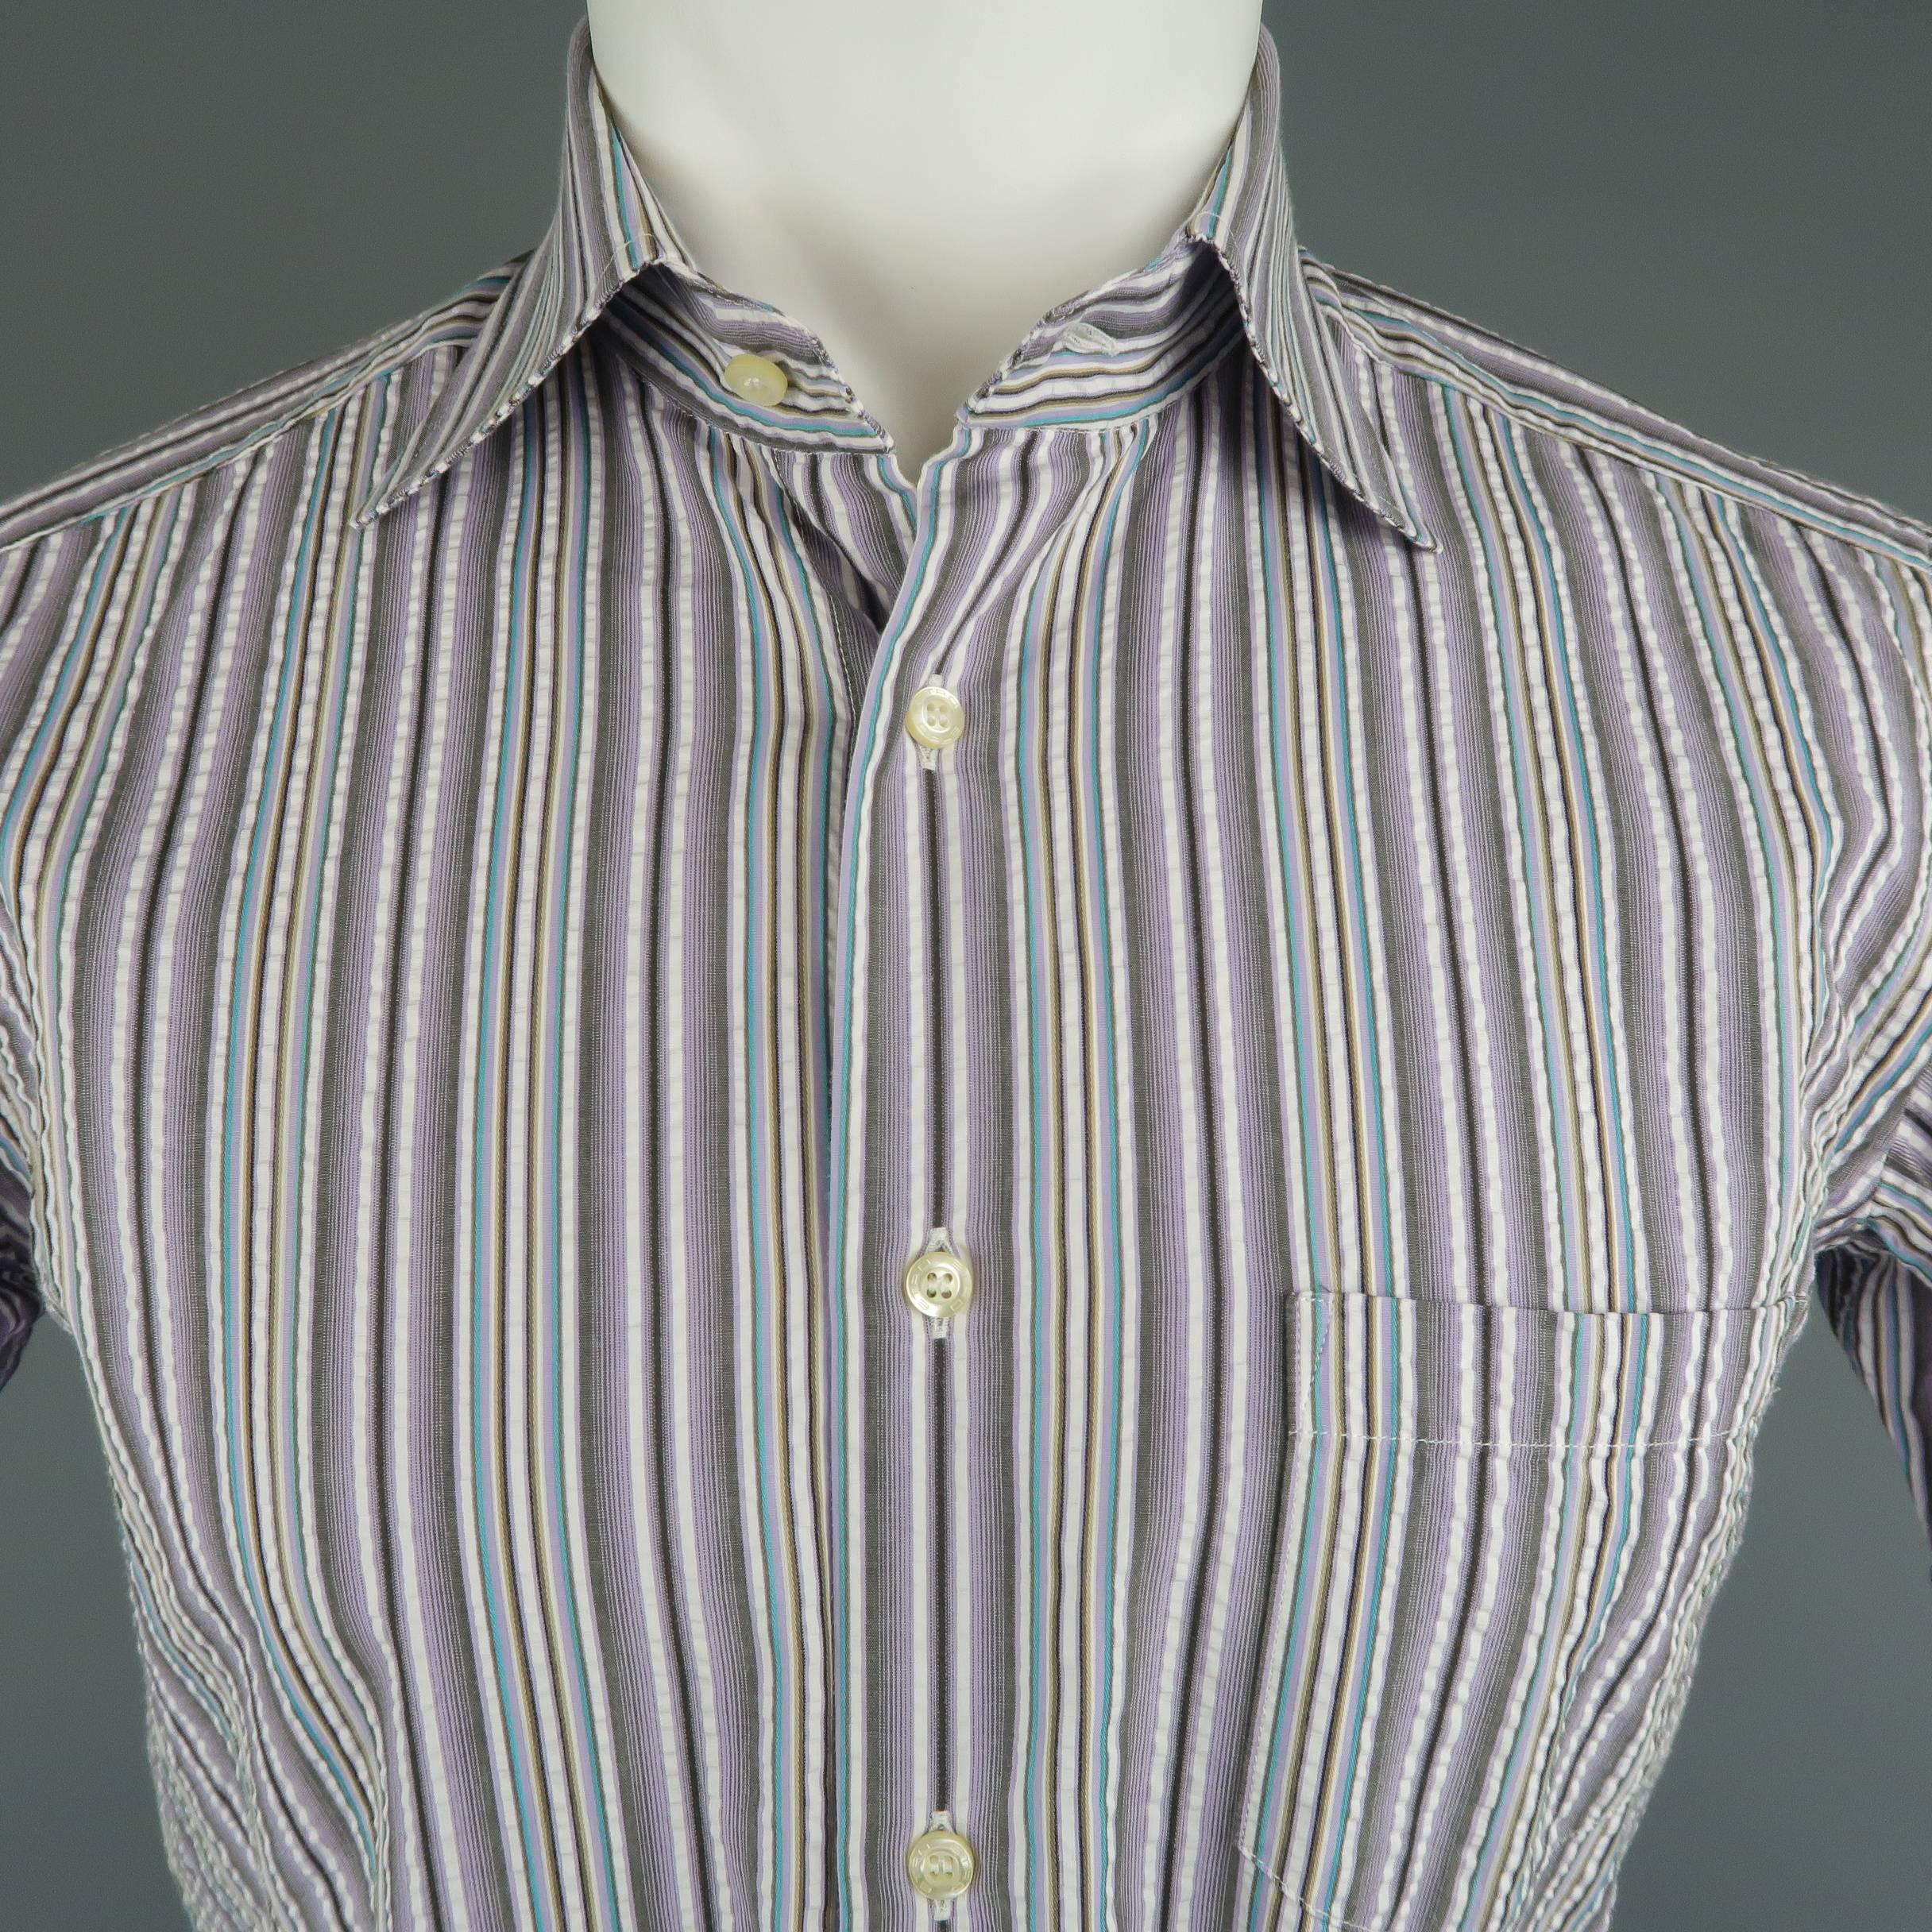 ETRO lavender cotton button up features vertical stripes in a seersucker like texture consisting of thin blue, gray, and yellow stripes. Made in Italy.
 
Excellent Pre-Owned Condition.
Marked: S
 
Measurements:
 
Shoulders: 17 In.
Chest: 41 In.
Arm: